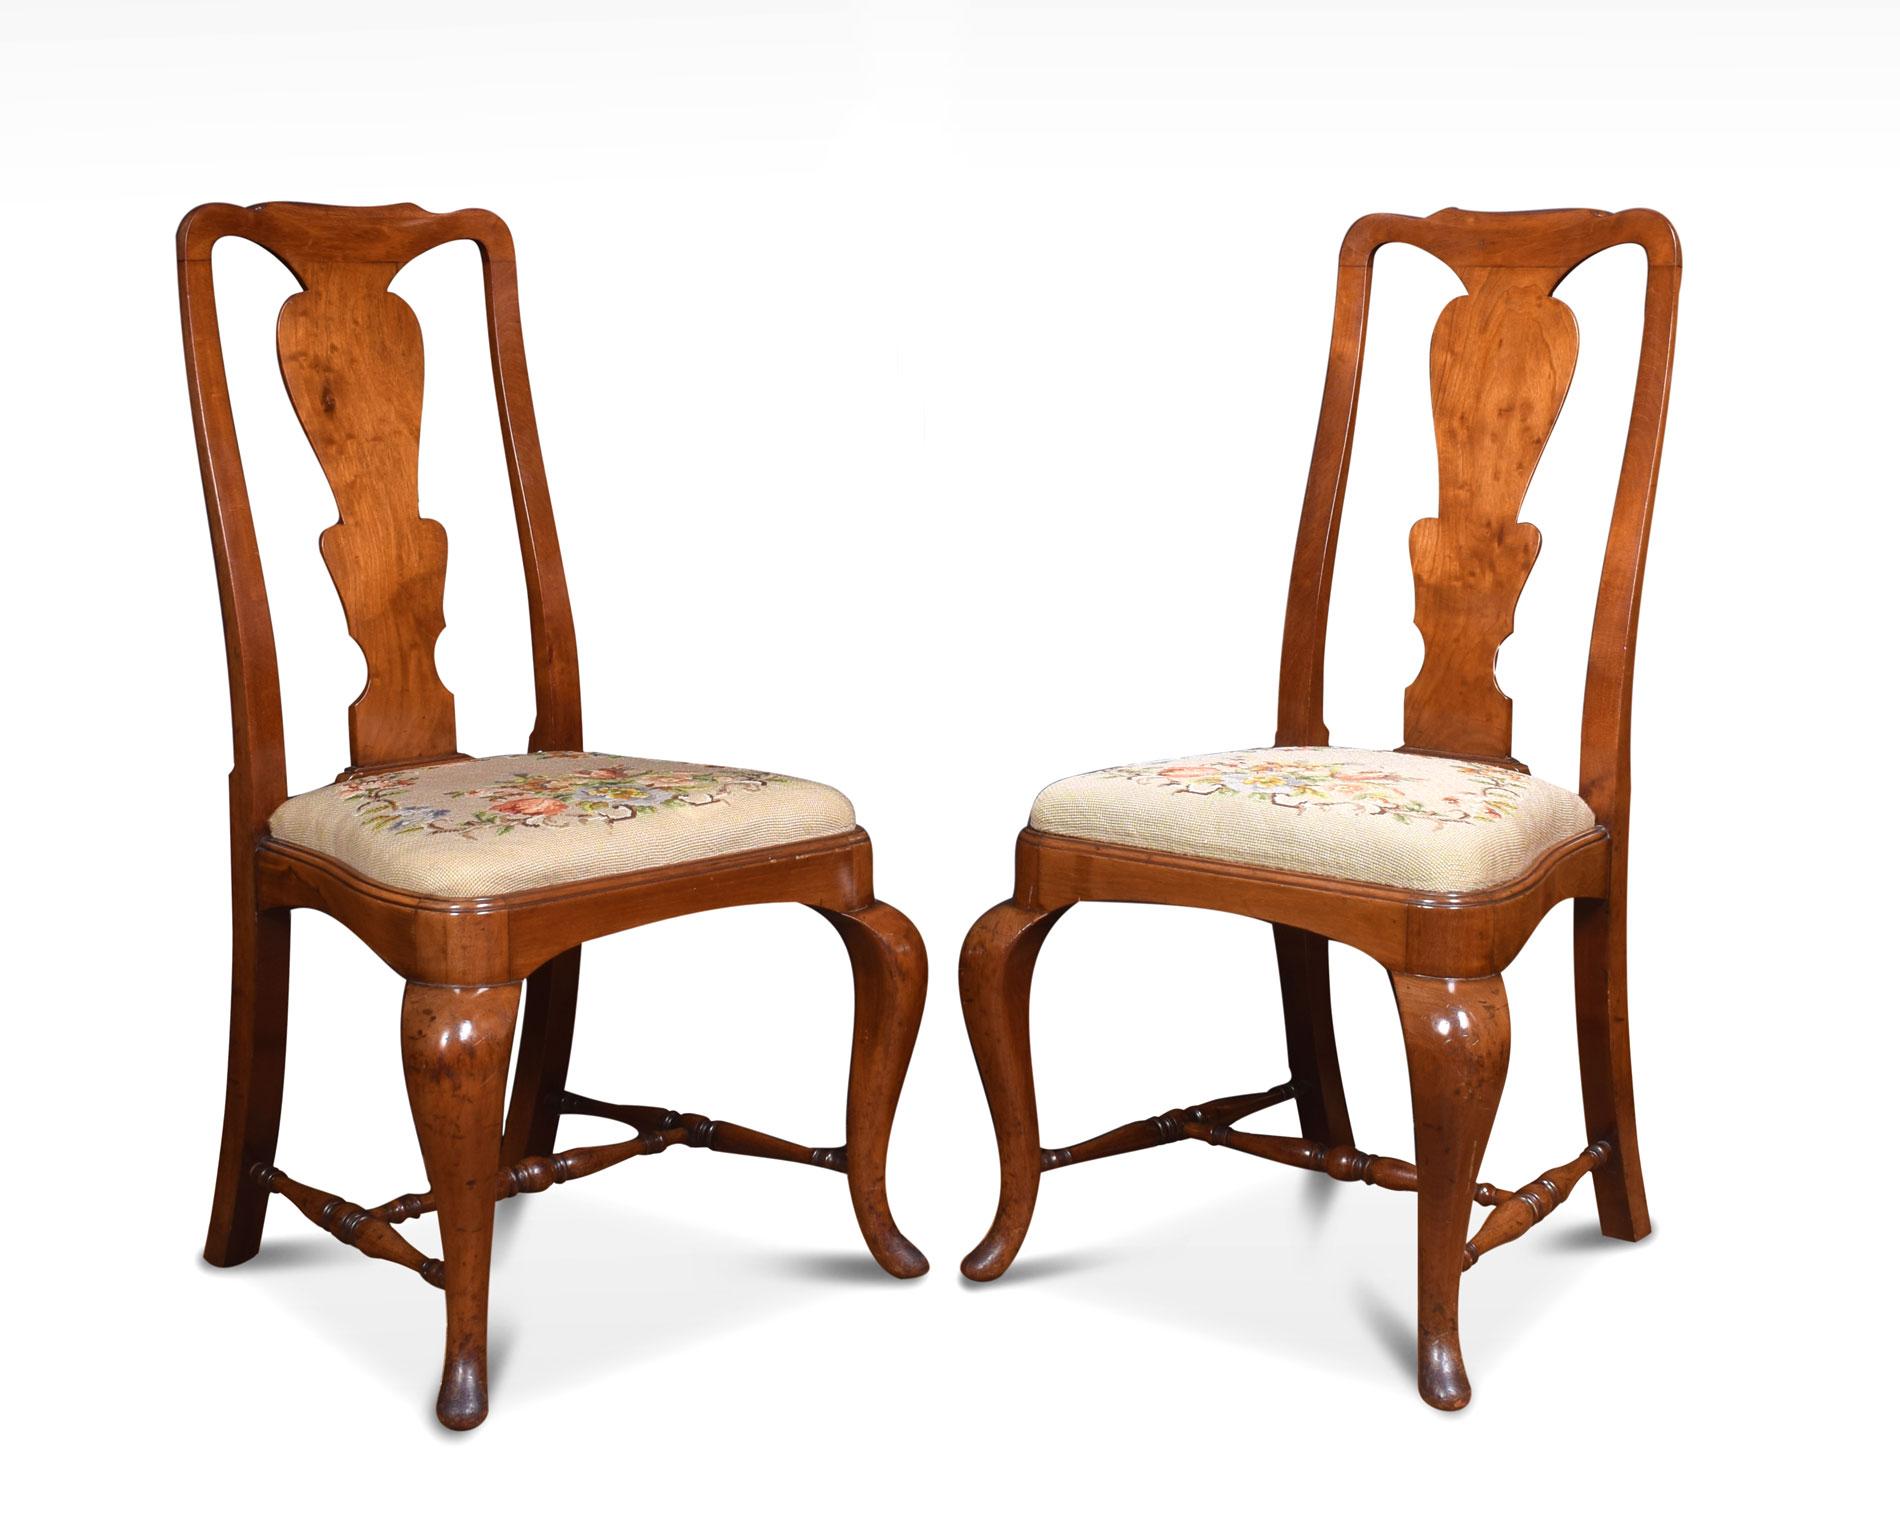 Set of eight Queen Anne style high back dining chairs, comprising of one armchair and seven chairs. having vase shaped back splat, drop-in seat and standing on cabriole supports united by turned stretchers.

Measures: Carvers
Height 40.5 inches